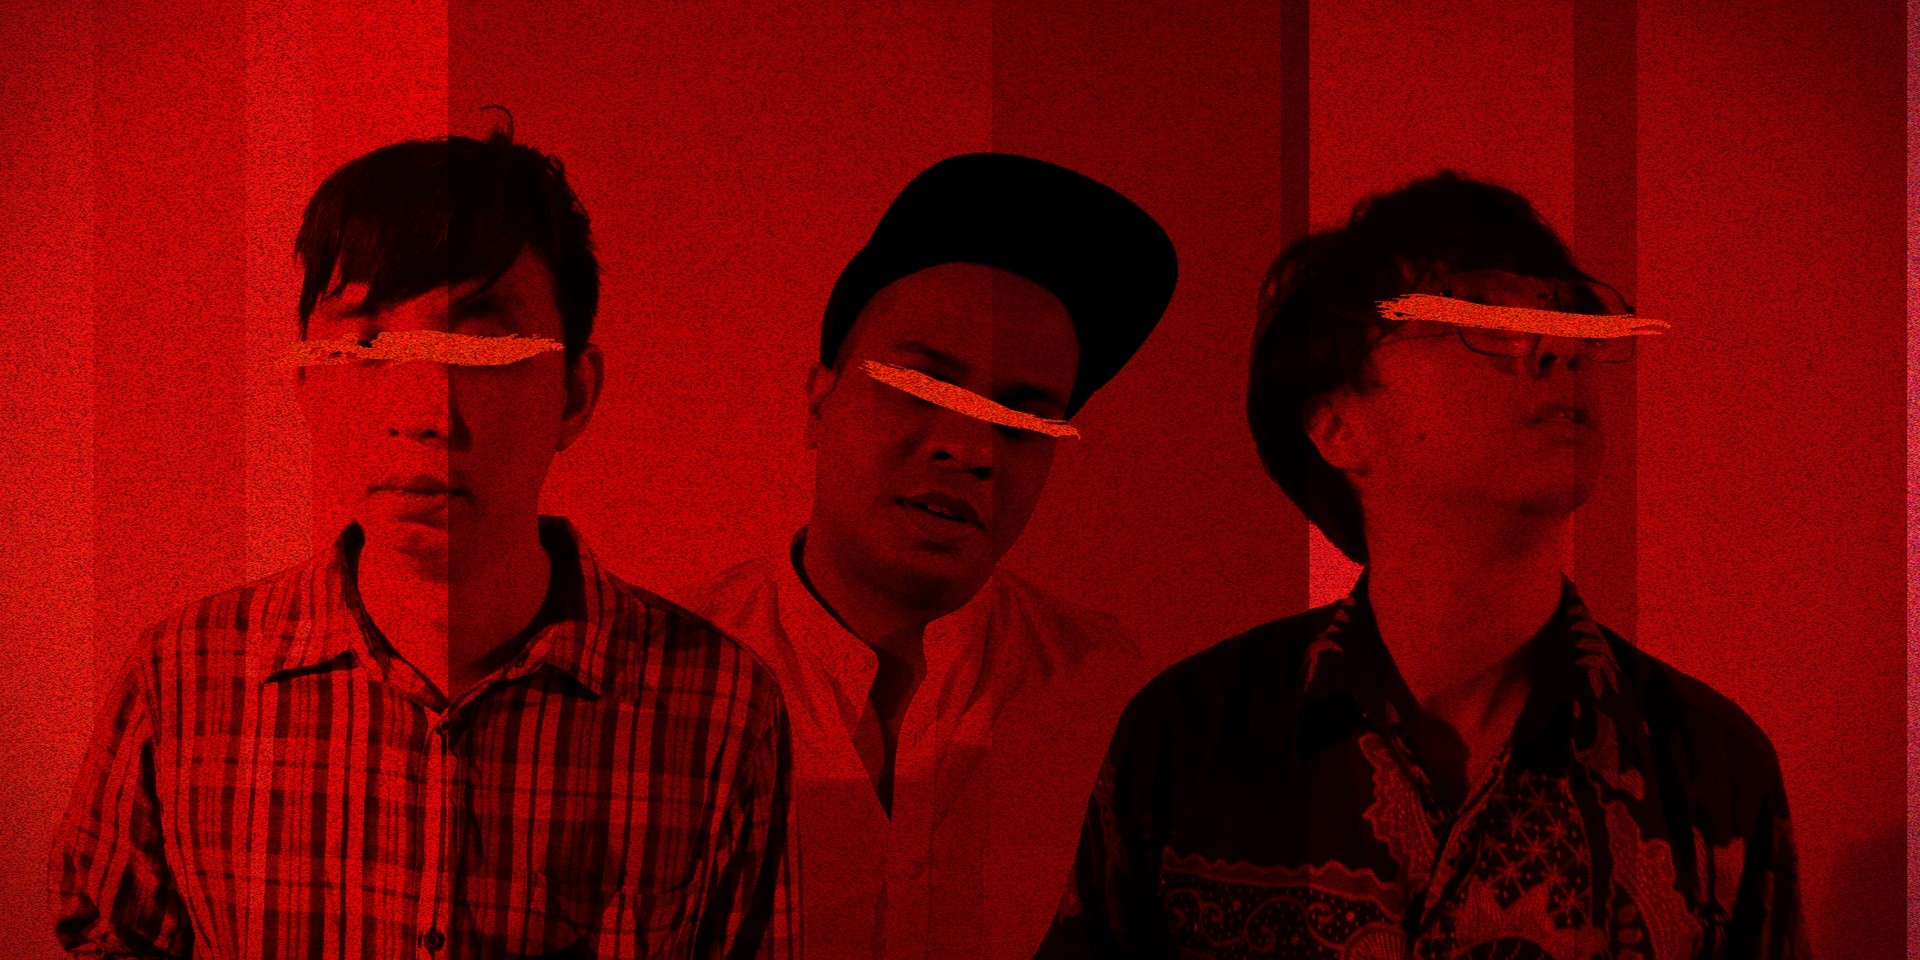 Singaporean garage rock trio BAD DOD will open for The Beths at upcoming Singapore show